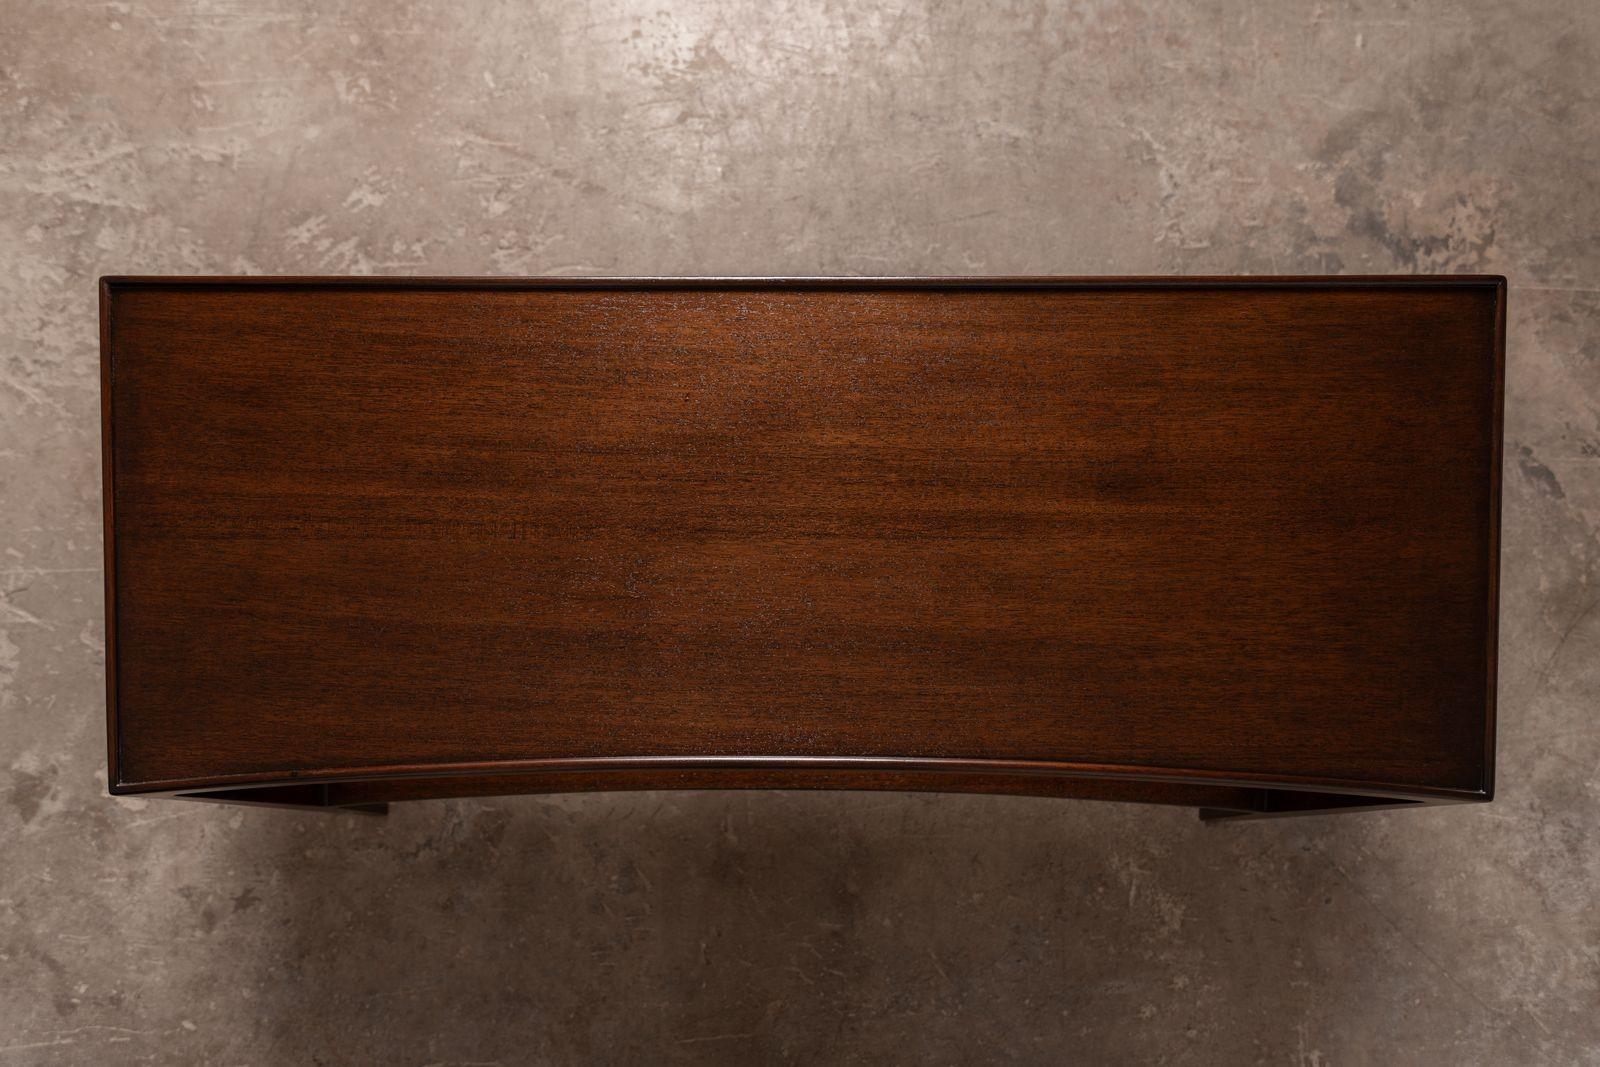 Curved Front two-Tier Console in Honduran Mahogany by Edward Wormley for Dunbar In Excellent Condition For Sale In Dallas, TX